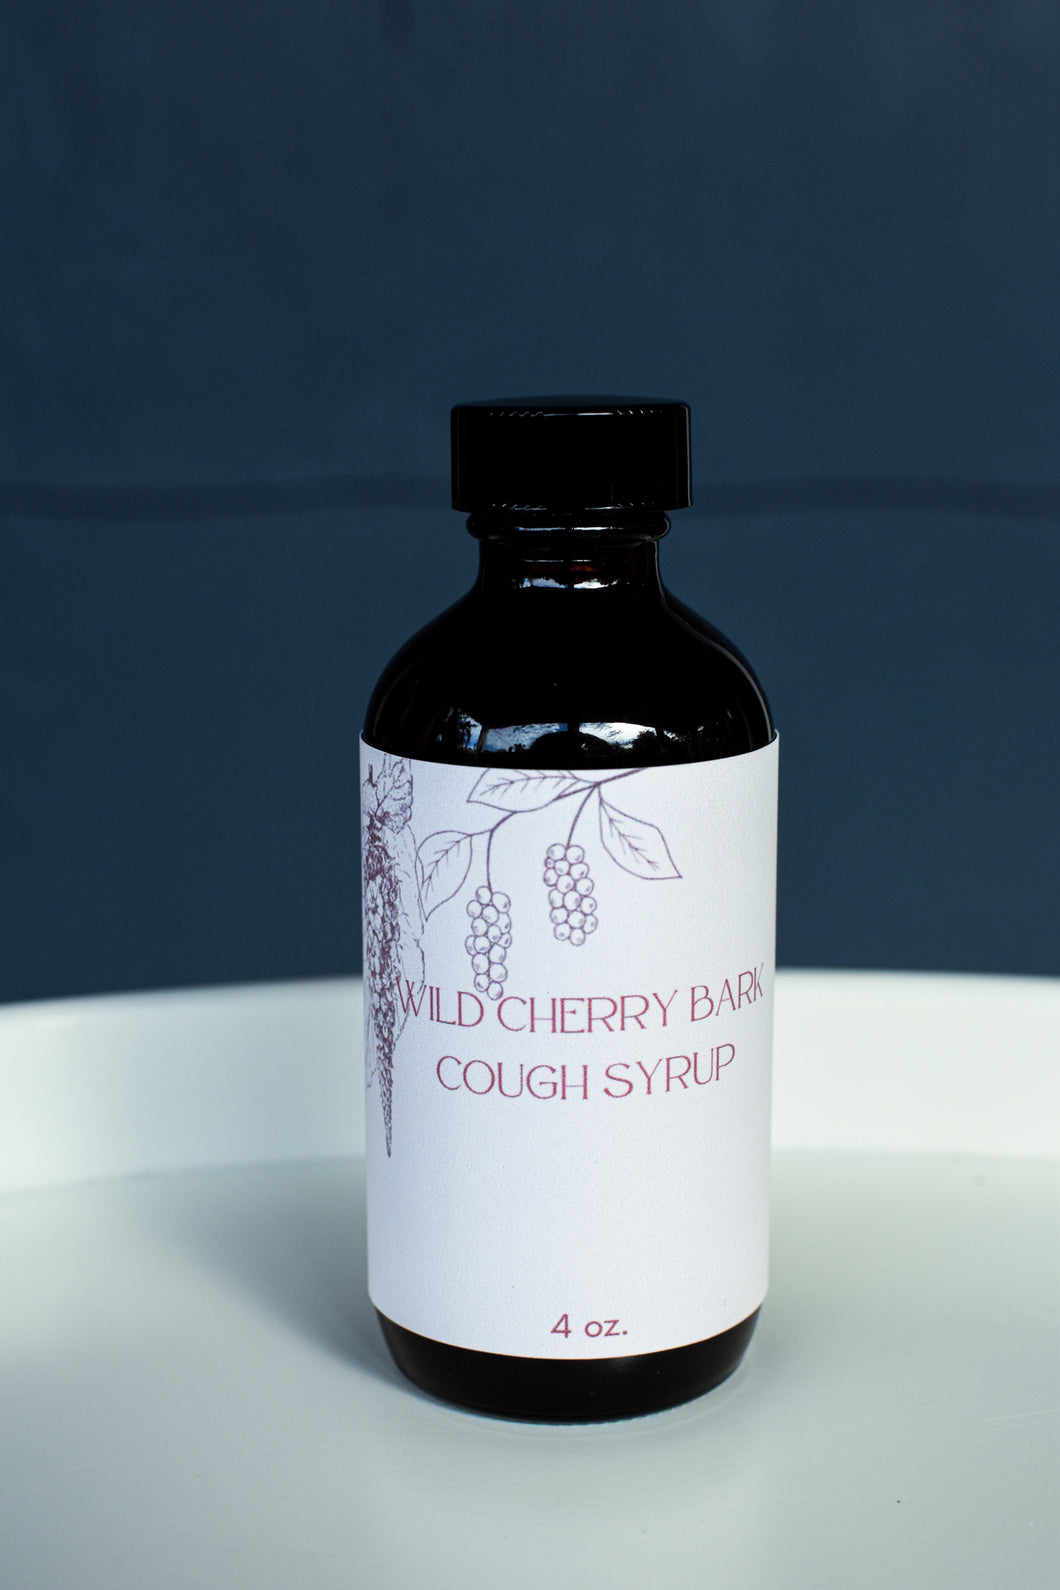 Wild Cherry Bark Cough Syrup